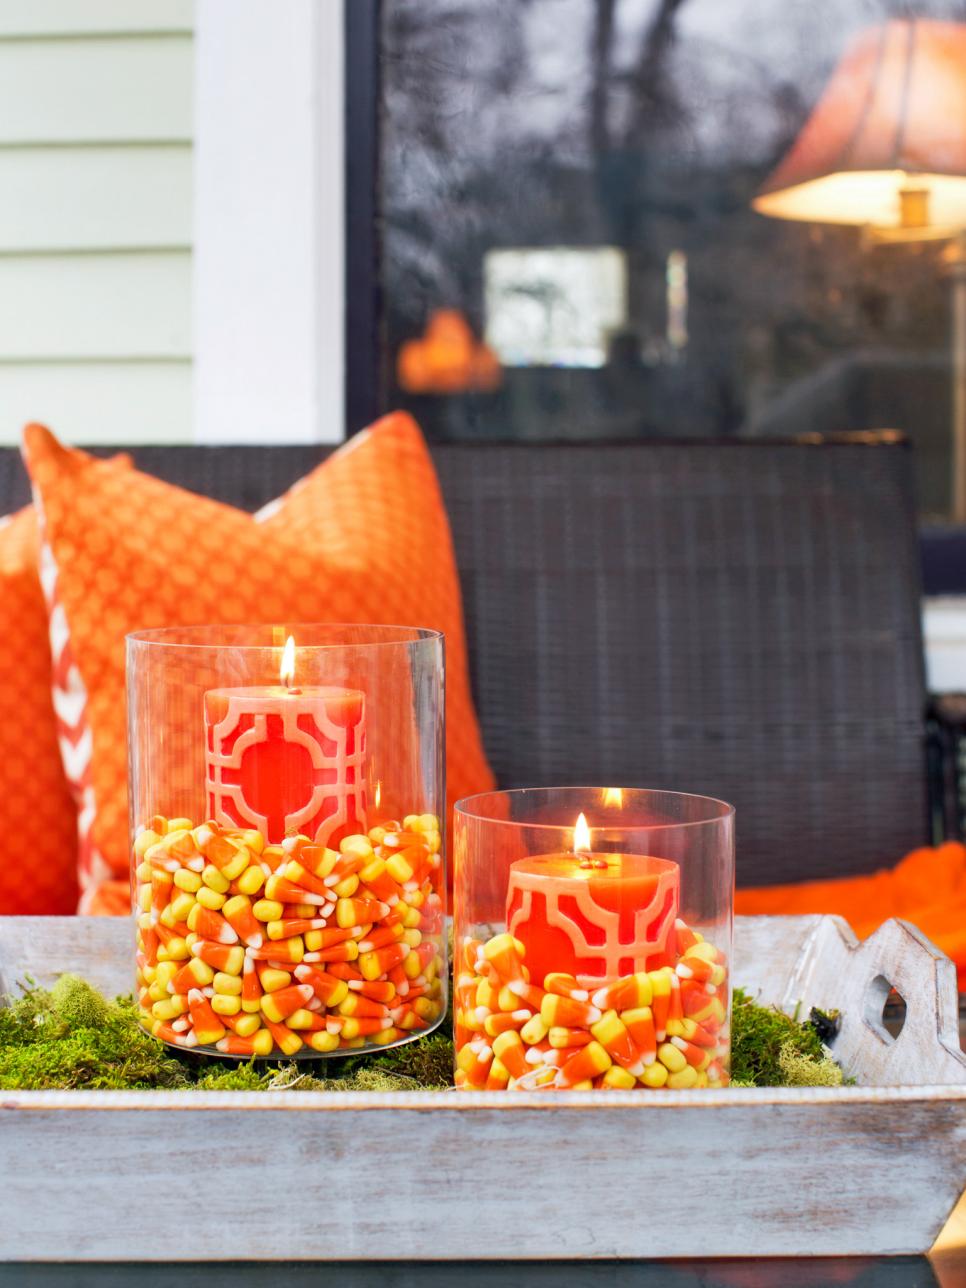 15 DECORATING IDEAS FOR HALLOWEEN